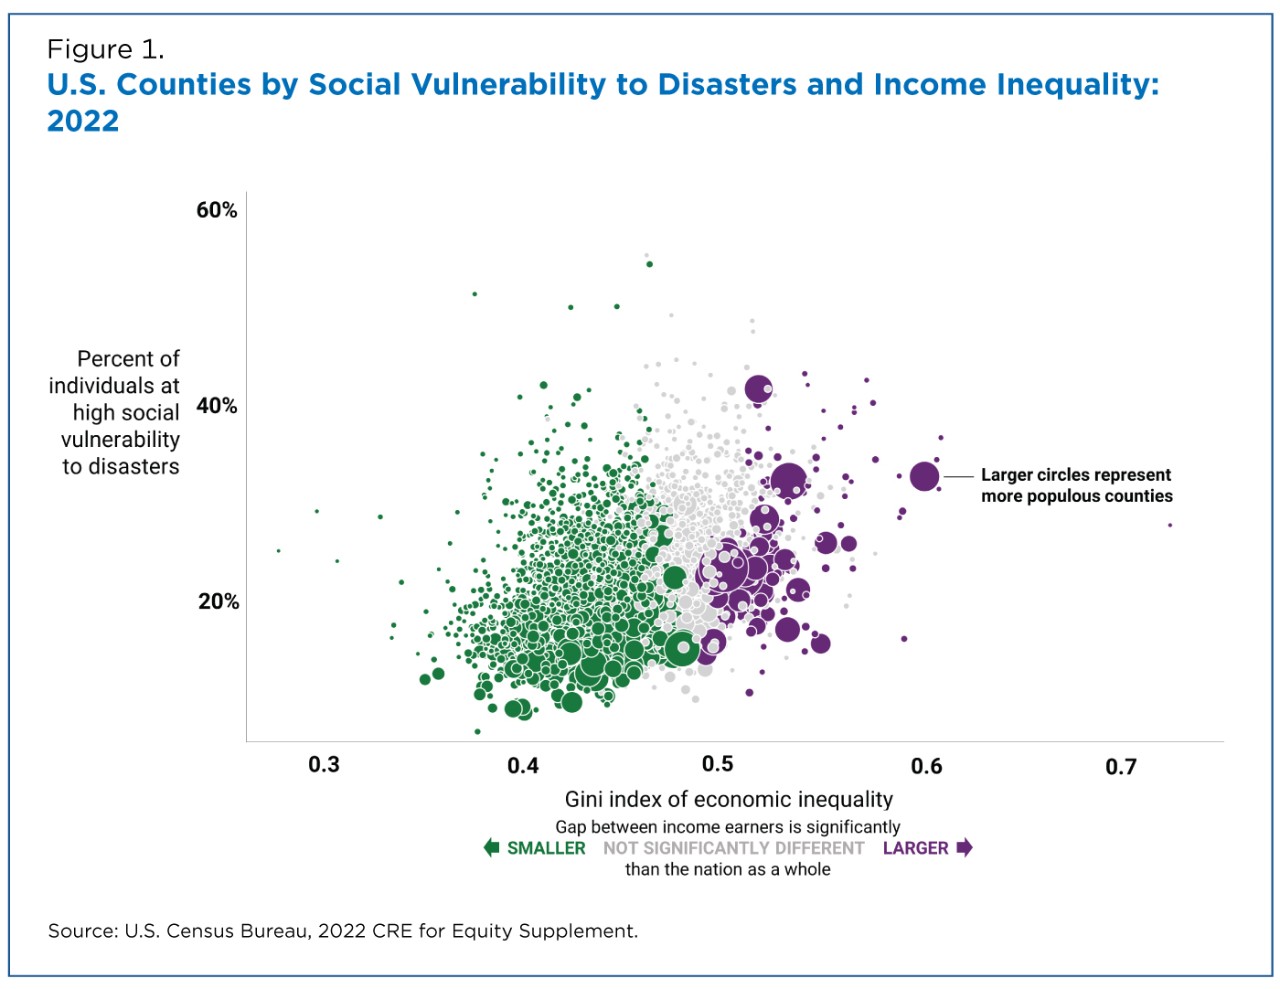 Figure 1. U.S. Counties by Social Vulnerability to Disasters and Income Inequality: 2022